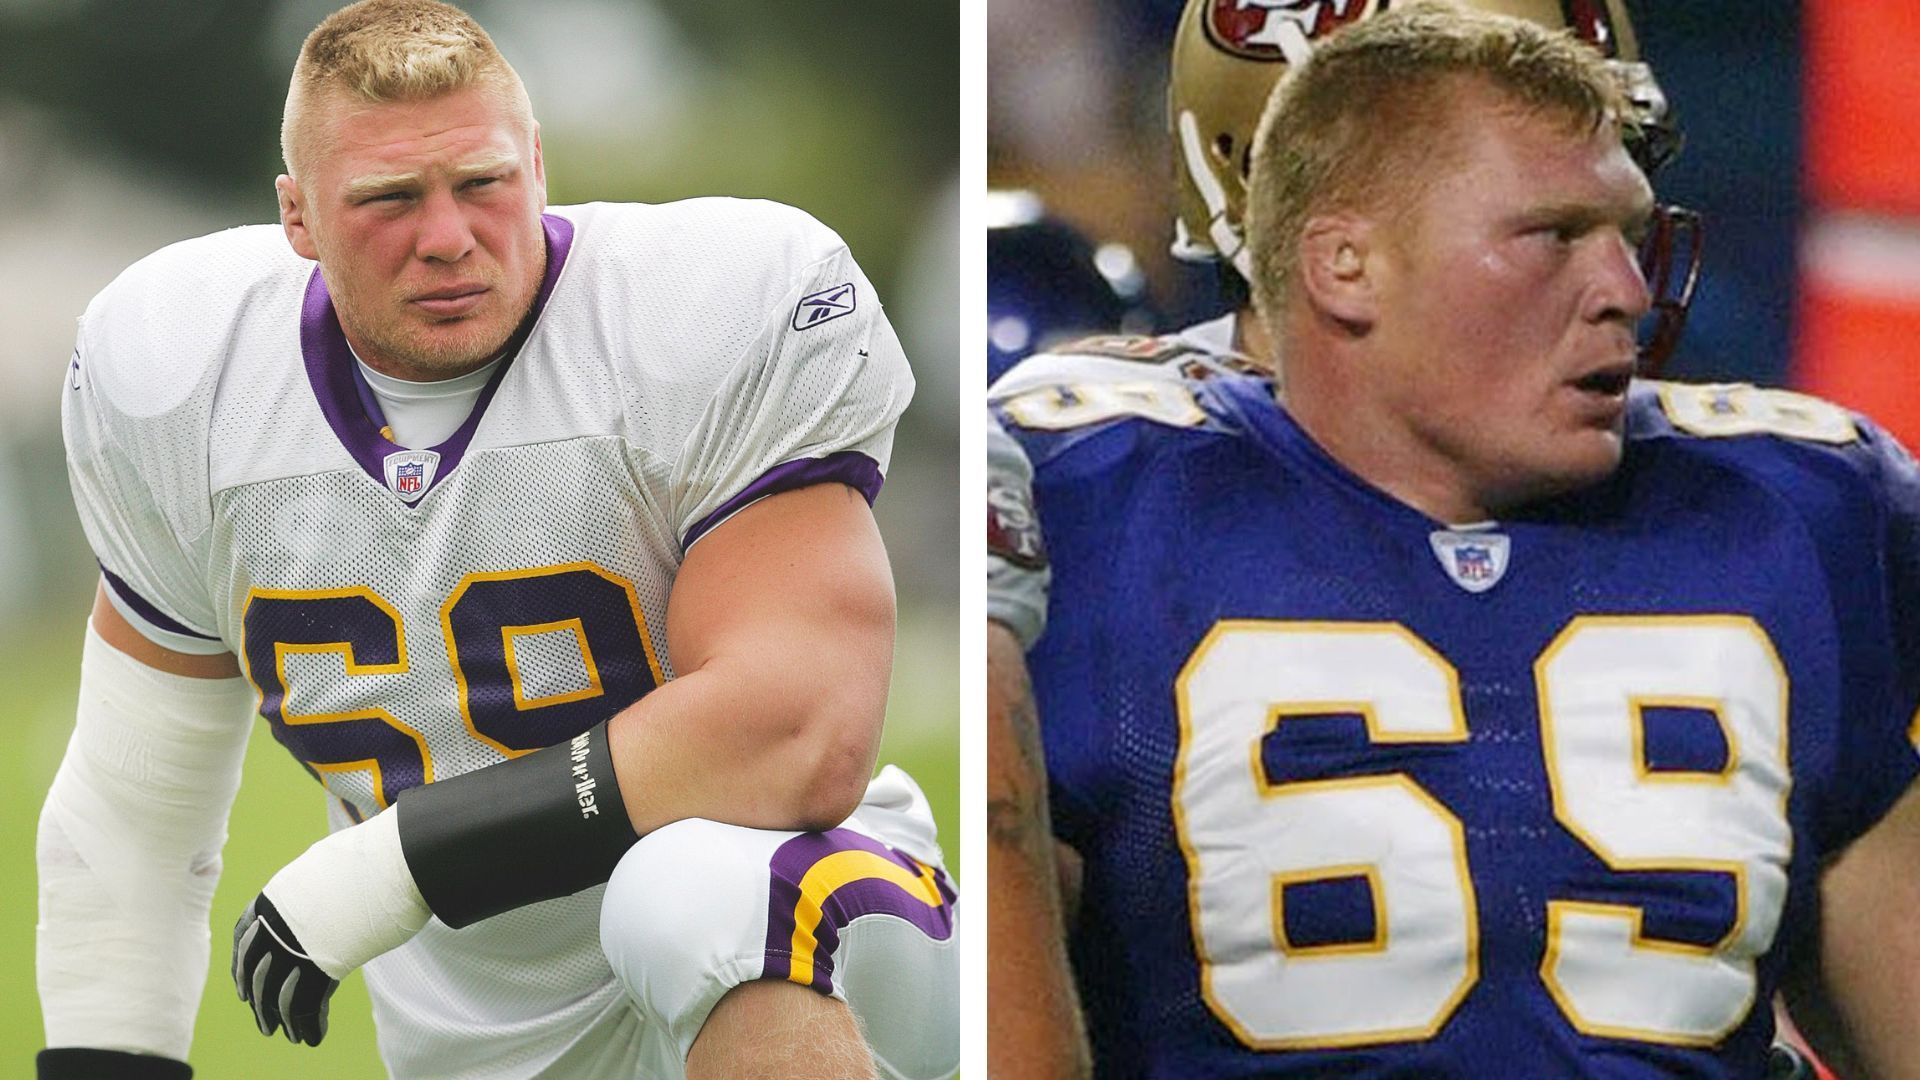 Brock Lesnar was signed to the Minnesota Vikings in 2004